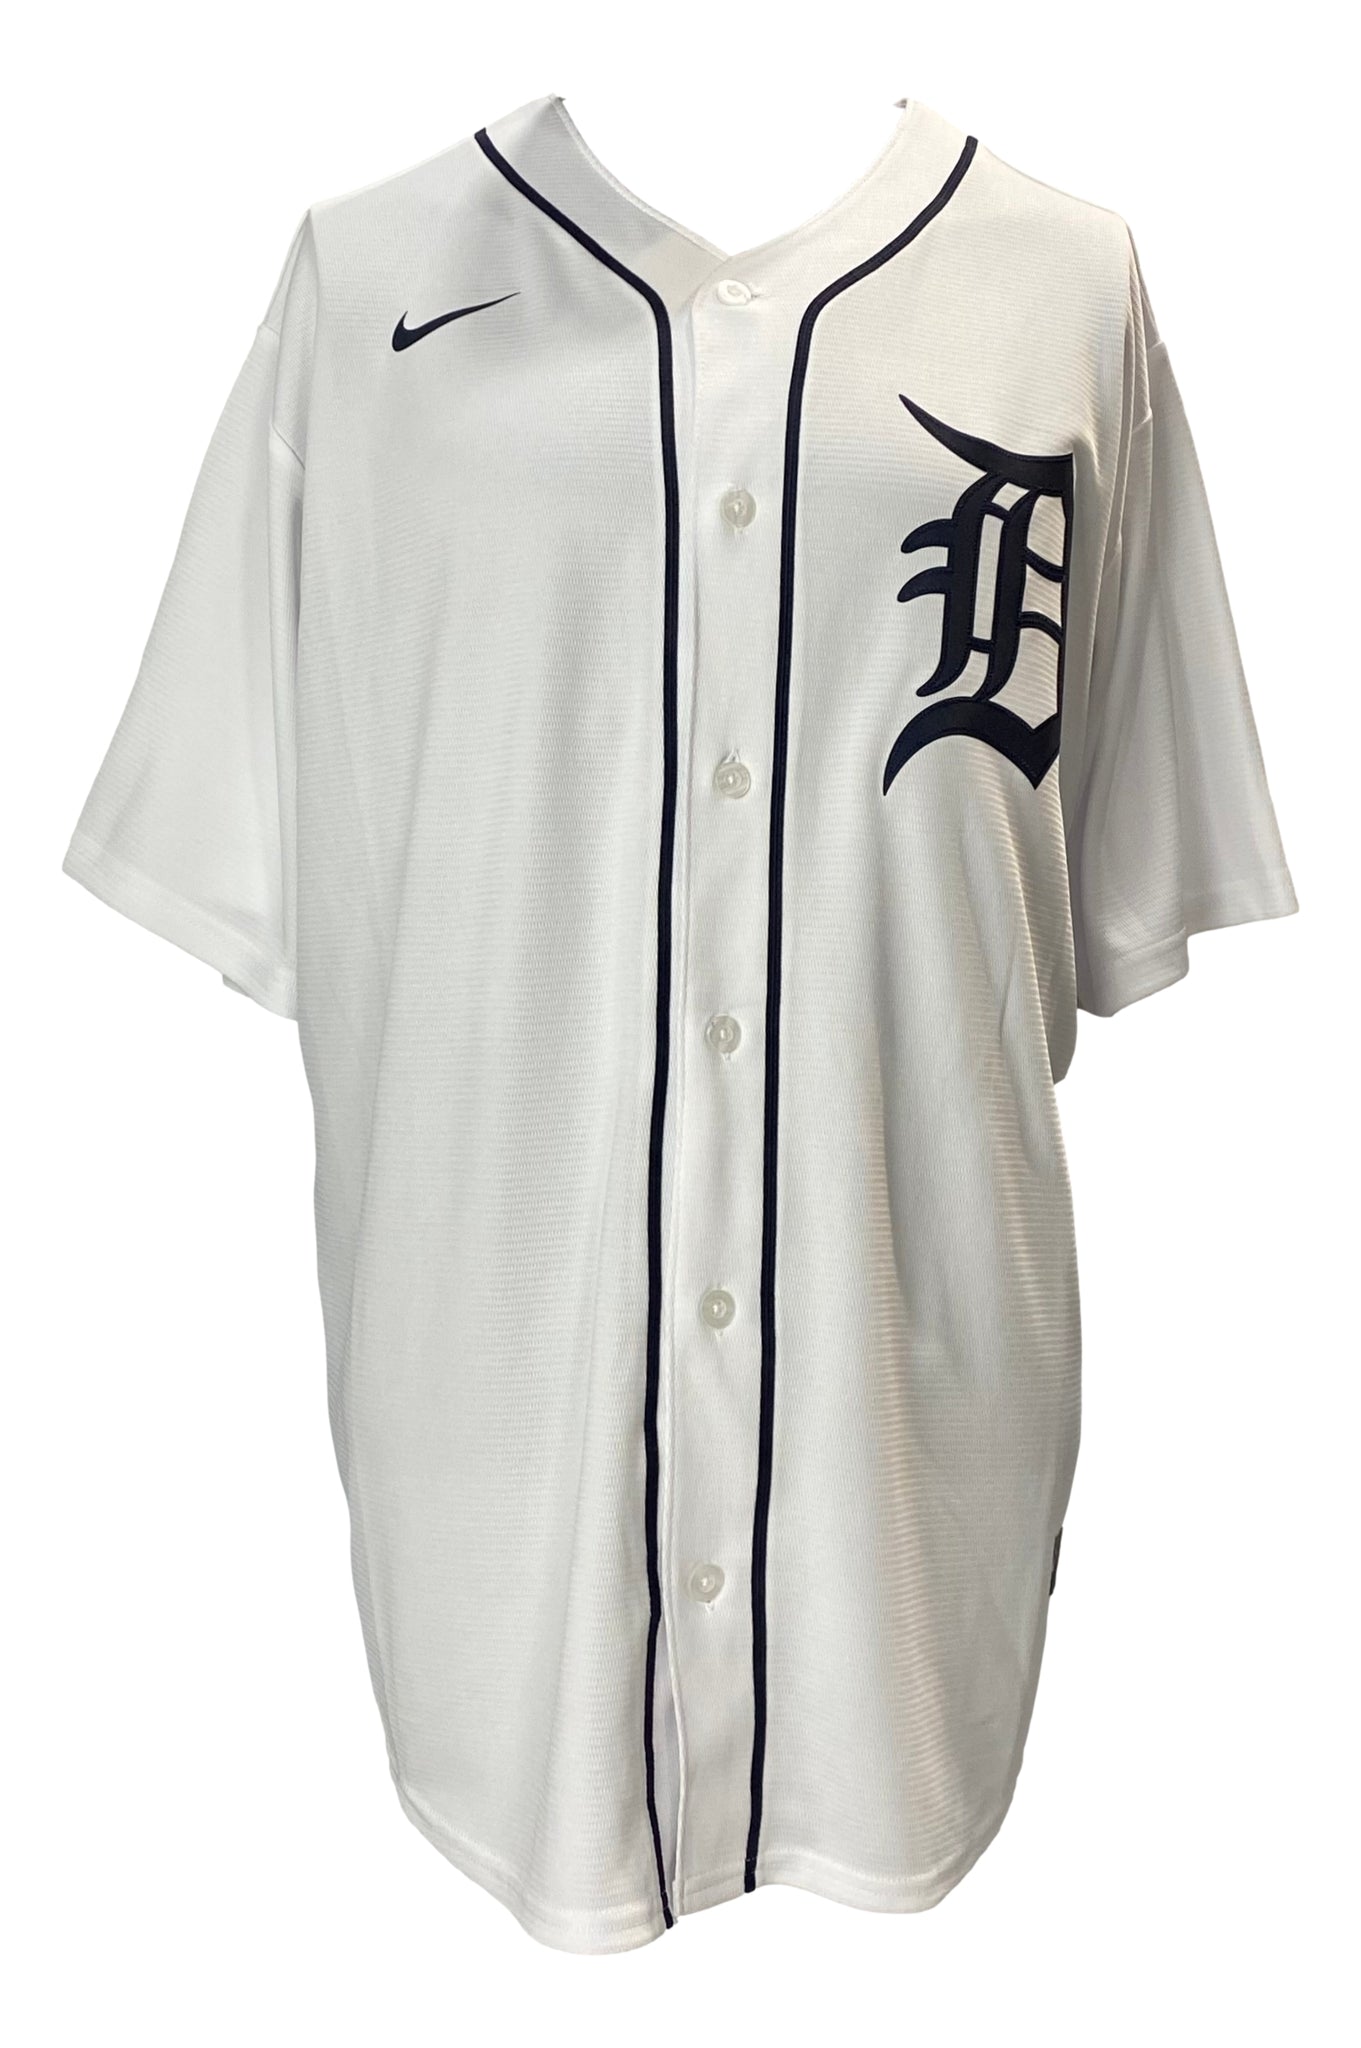 Miguel Cabrera Signed Detroit Tigers White Nike Baseball Jersey